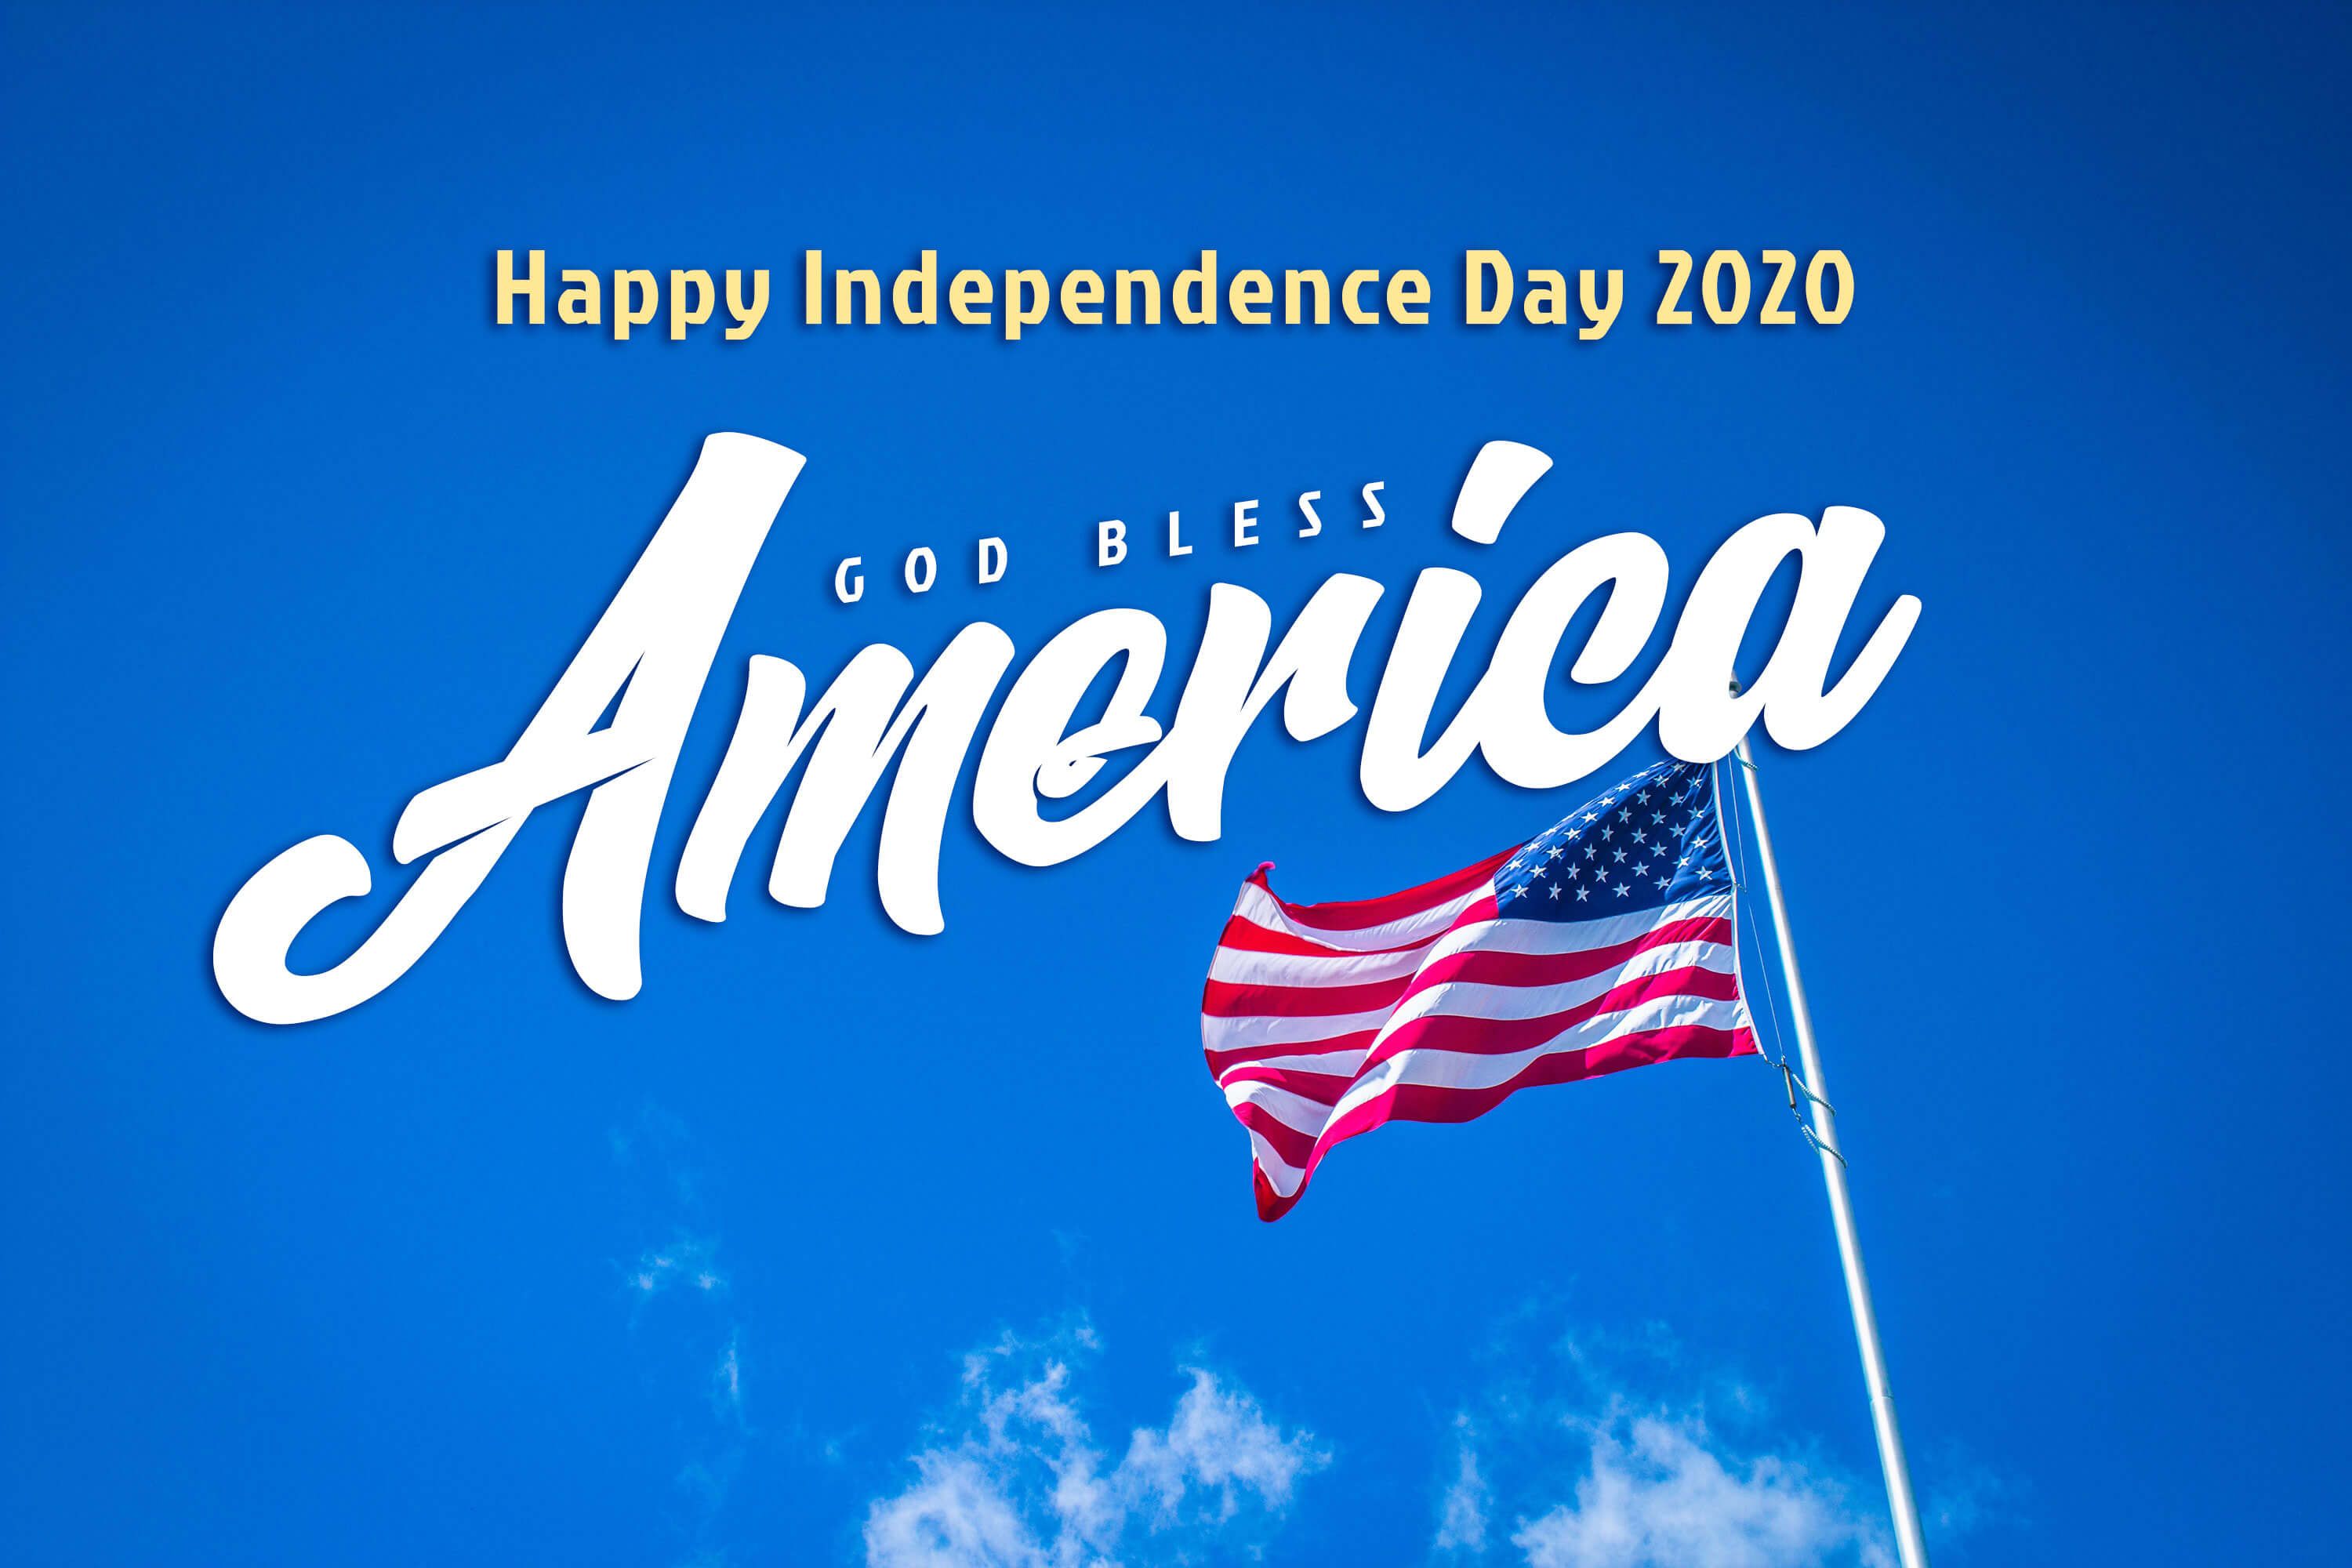 Happy 4th of July Independence Day USA 2020 Image